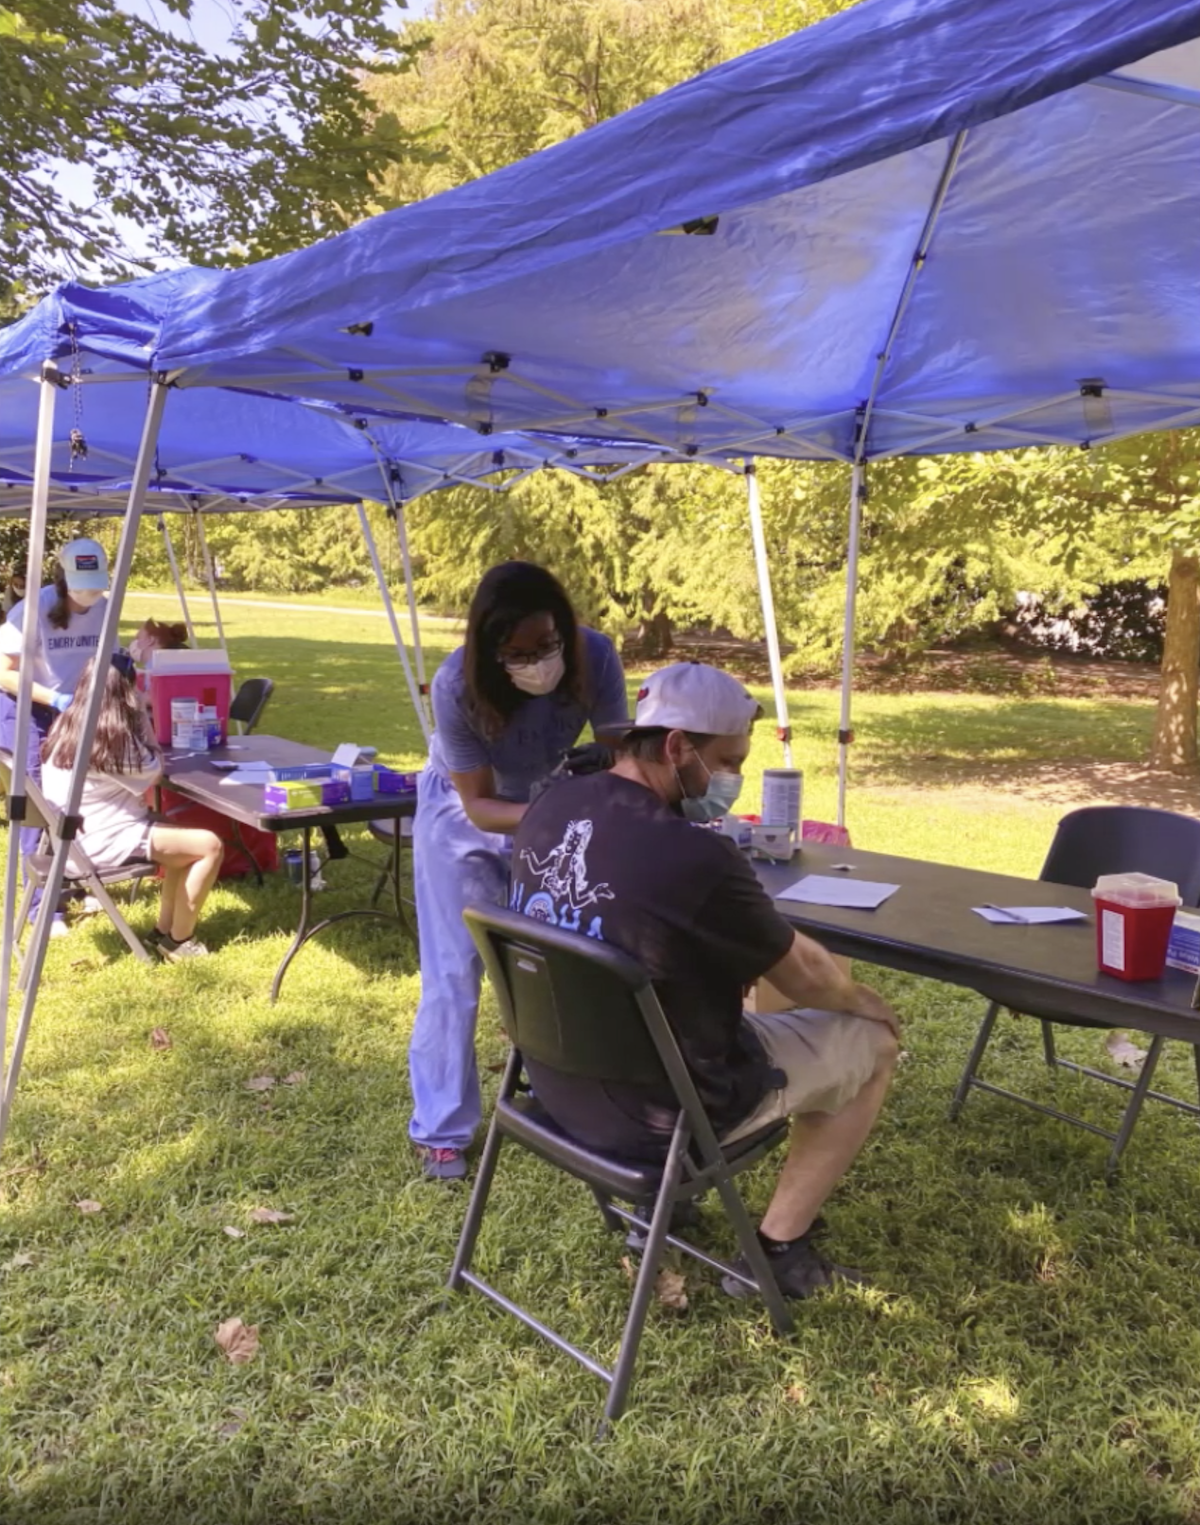 A volunteer administers a vaccine at an outdoor ORT event